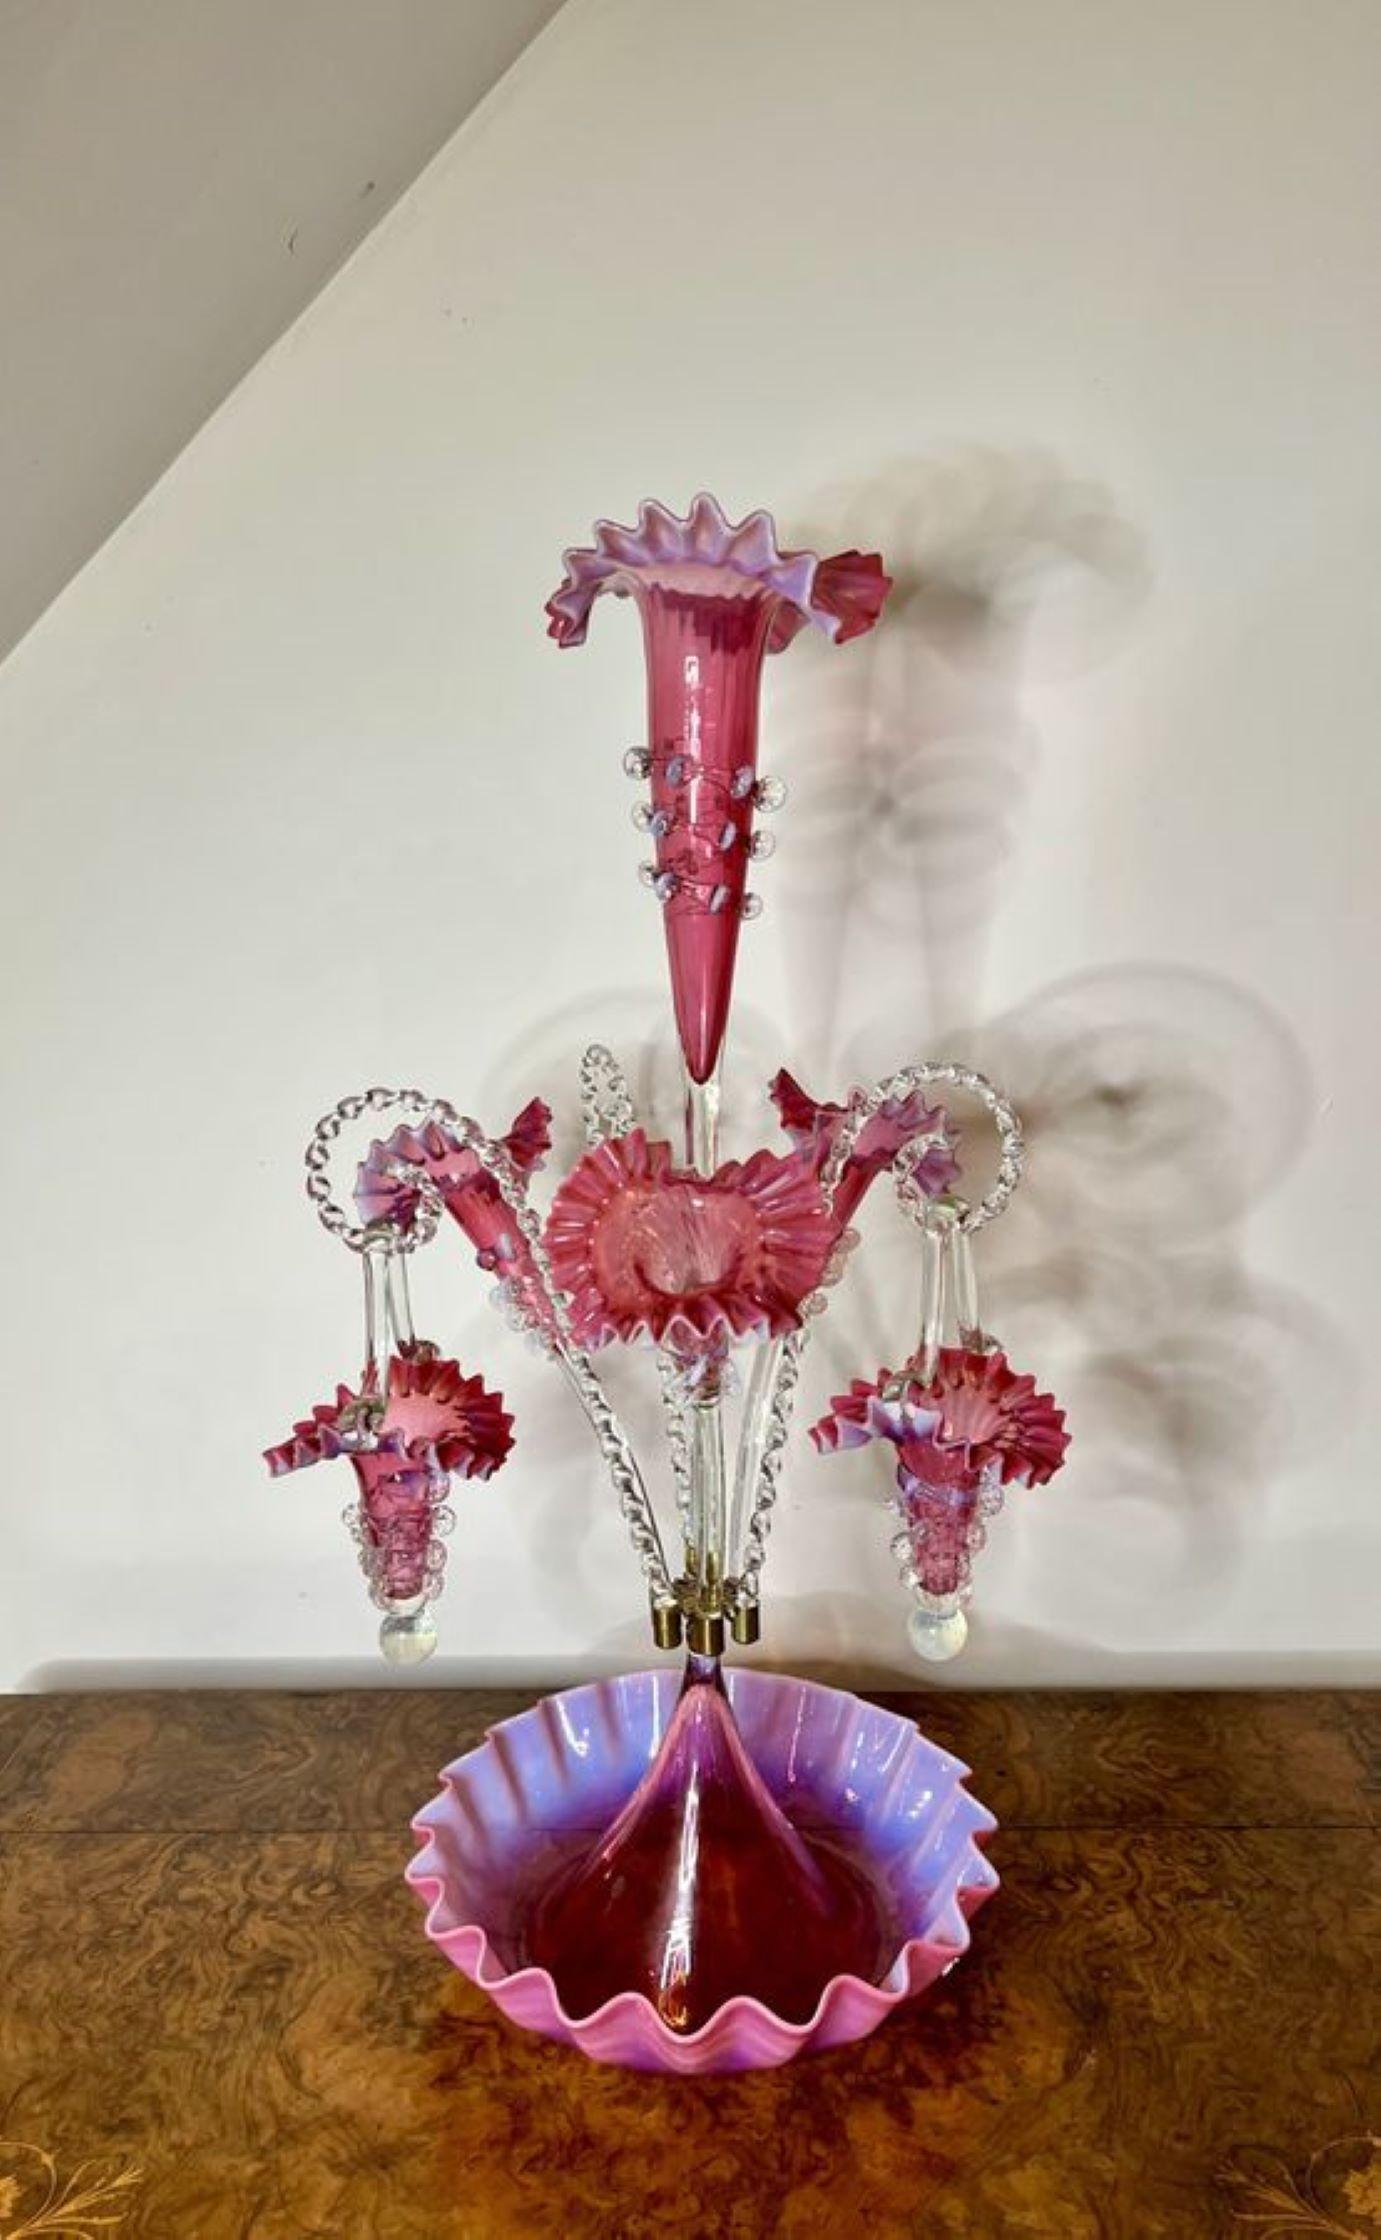 Outstanding quality large antique Victorian cranberry glass epergne 2